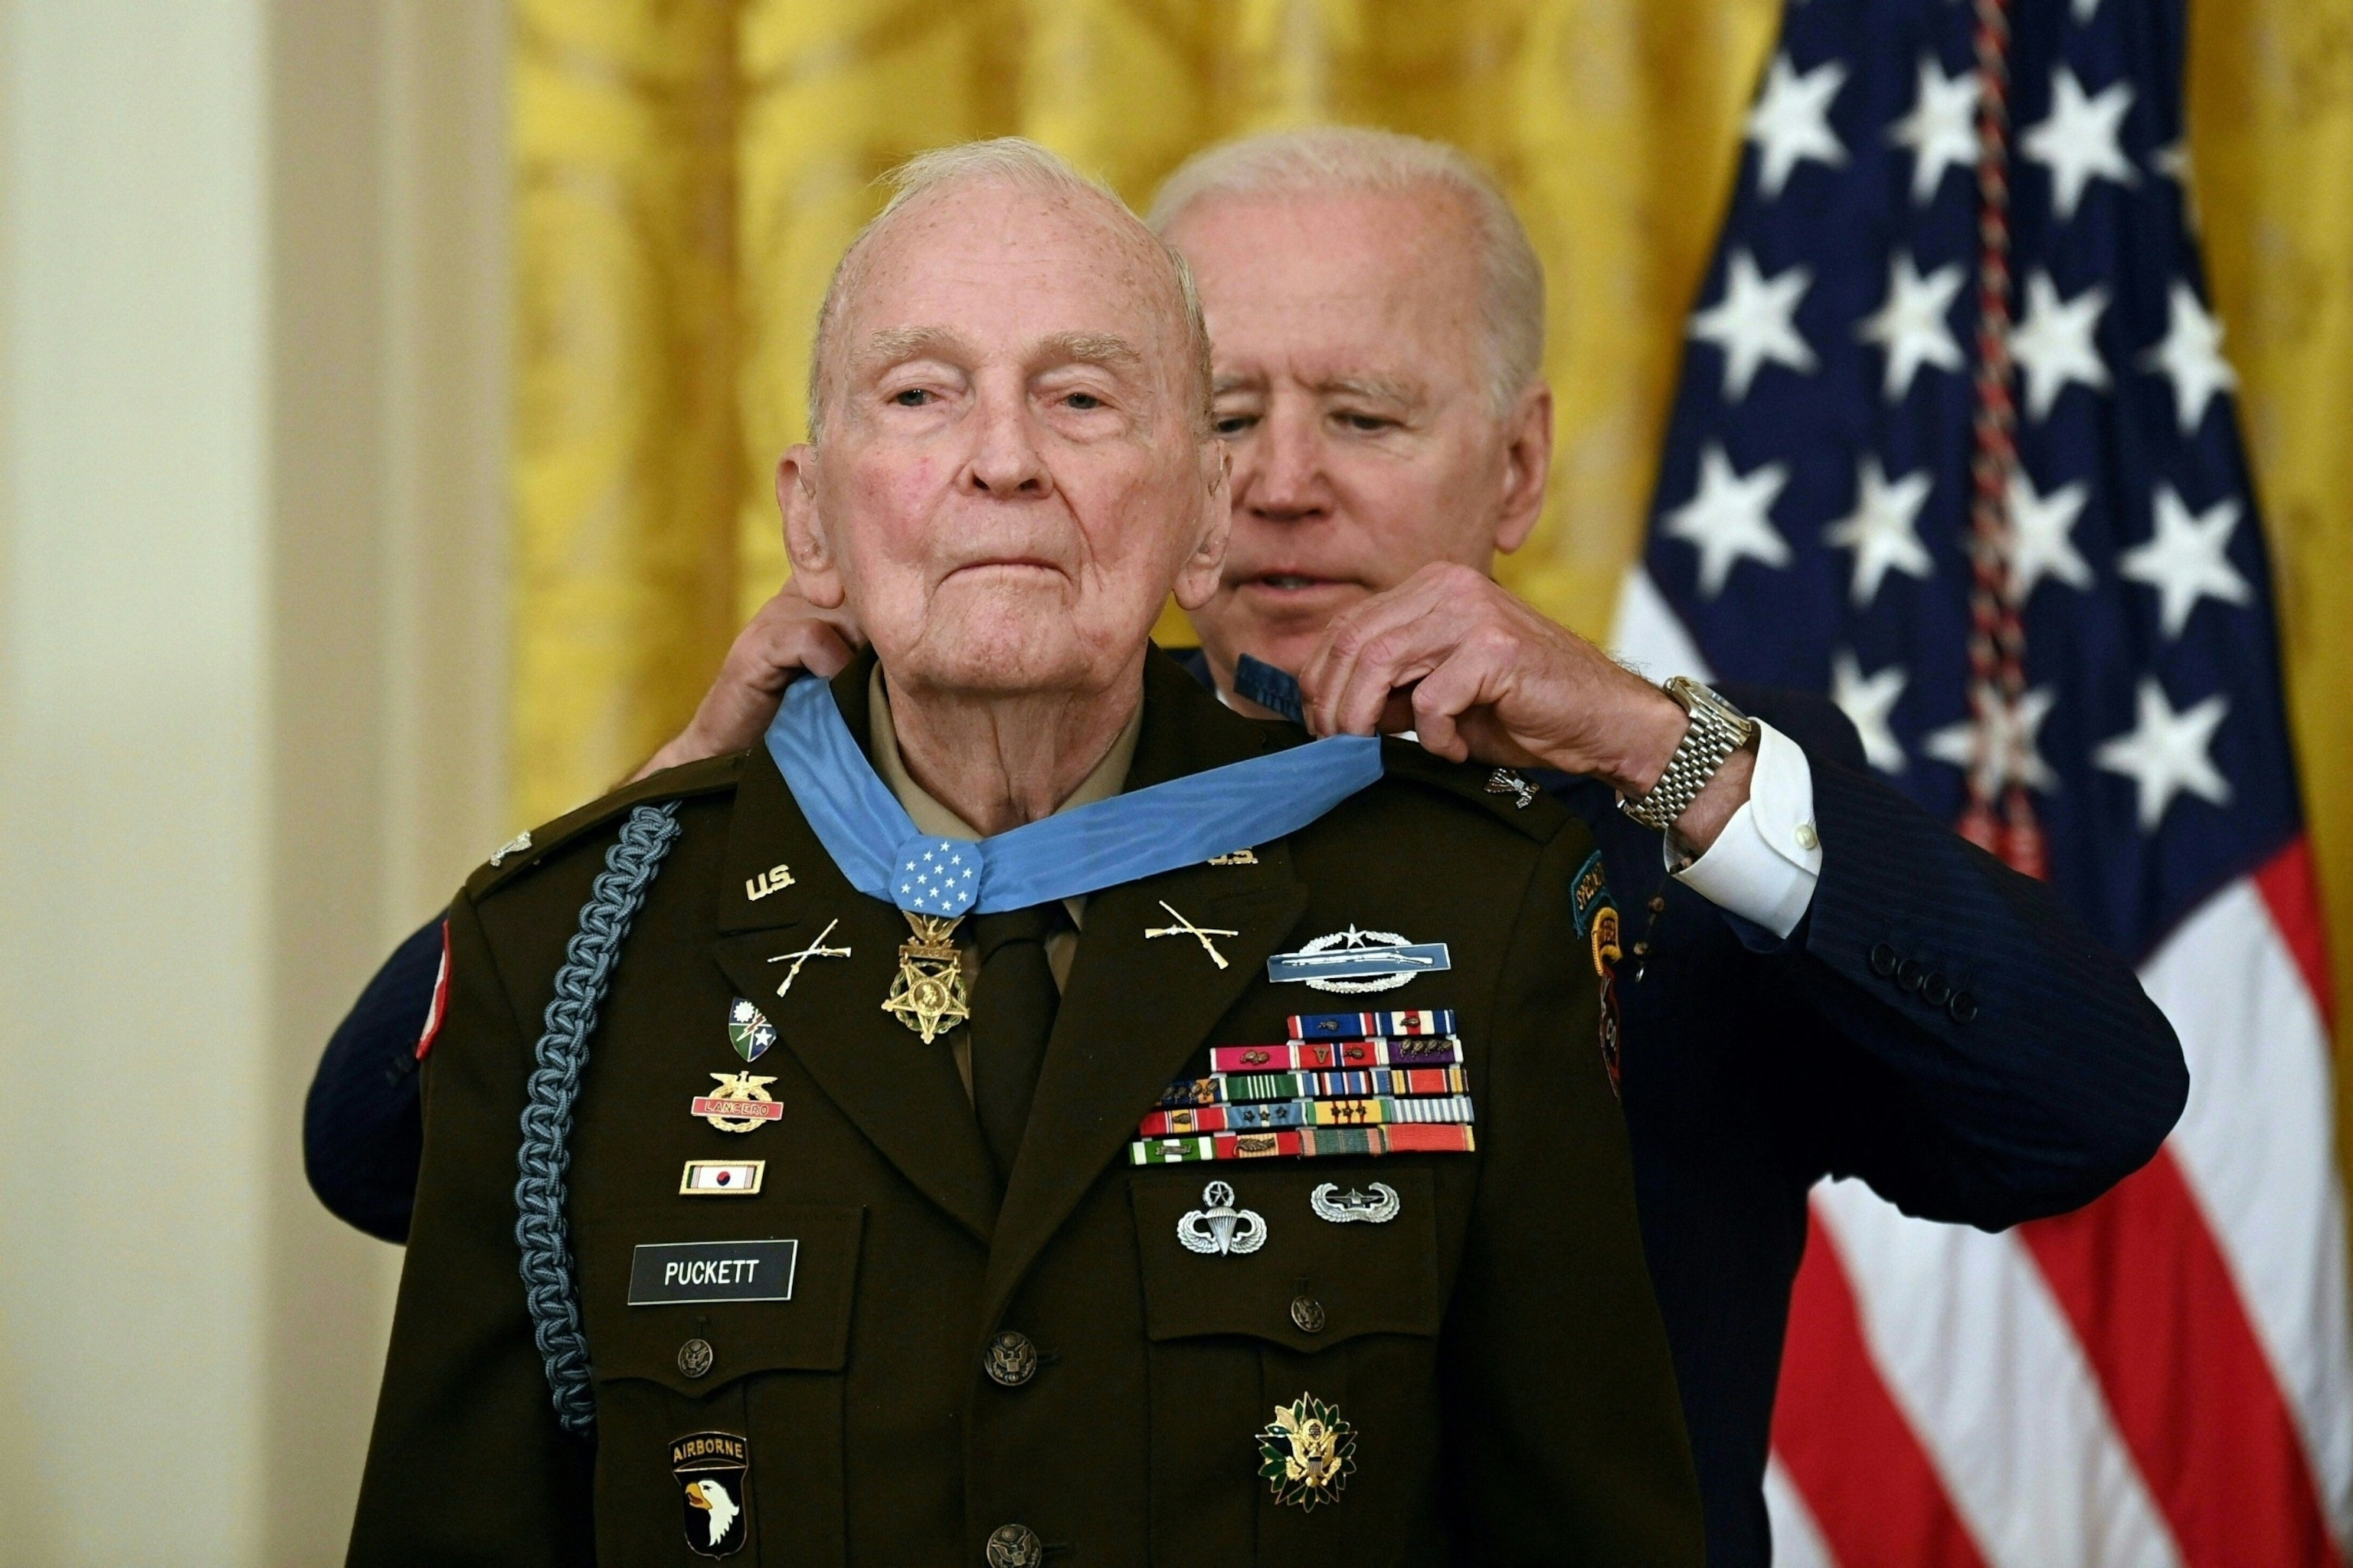 PHOTO: President Joe Biden presents the Medal of Honor to 94-year-old retired Army colonel Ralph Puckett, Jr., for conspicuous gallantry while serving during the Korean War, in a ceremony in the East Room of the White House in Washington, May 21, 2021. 